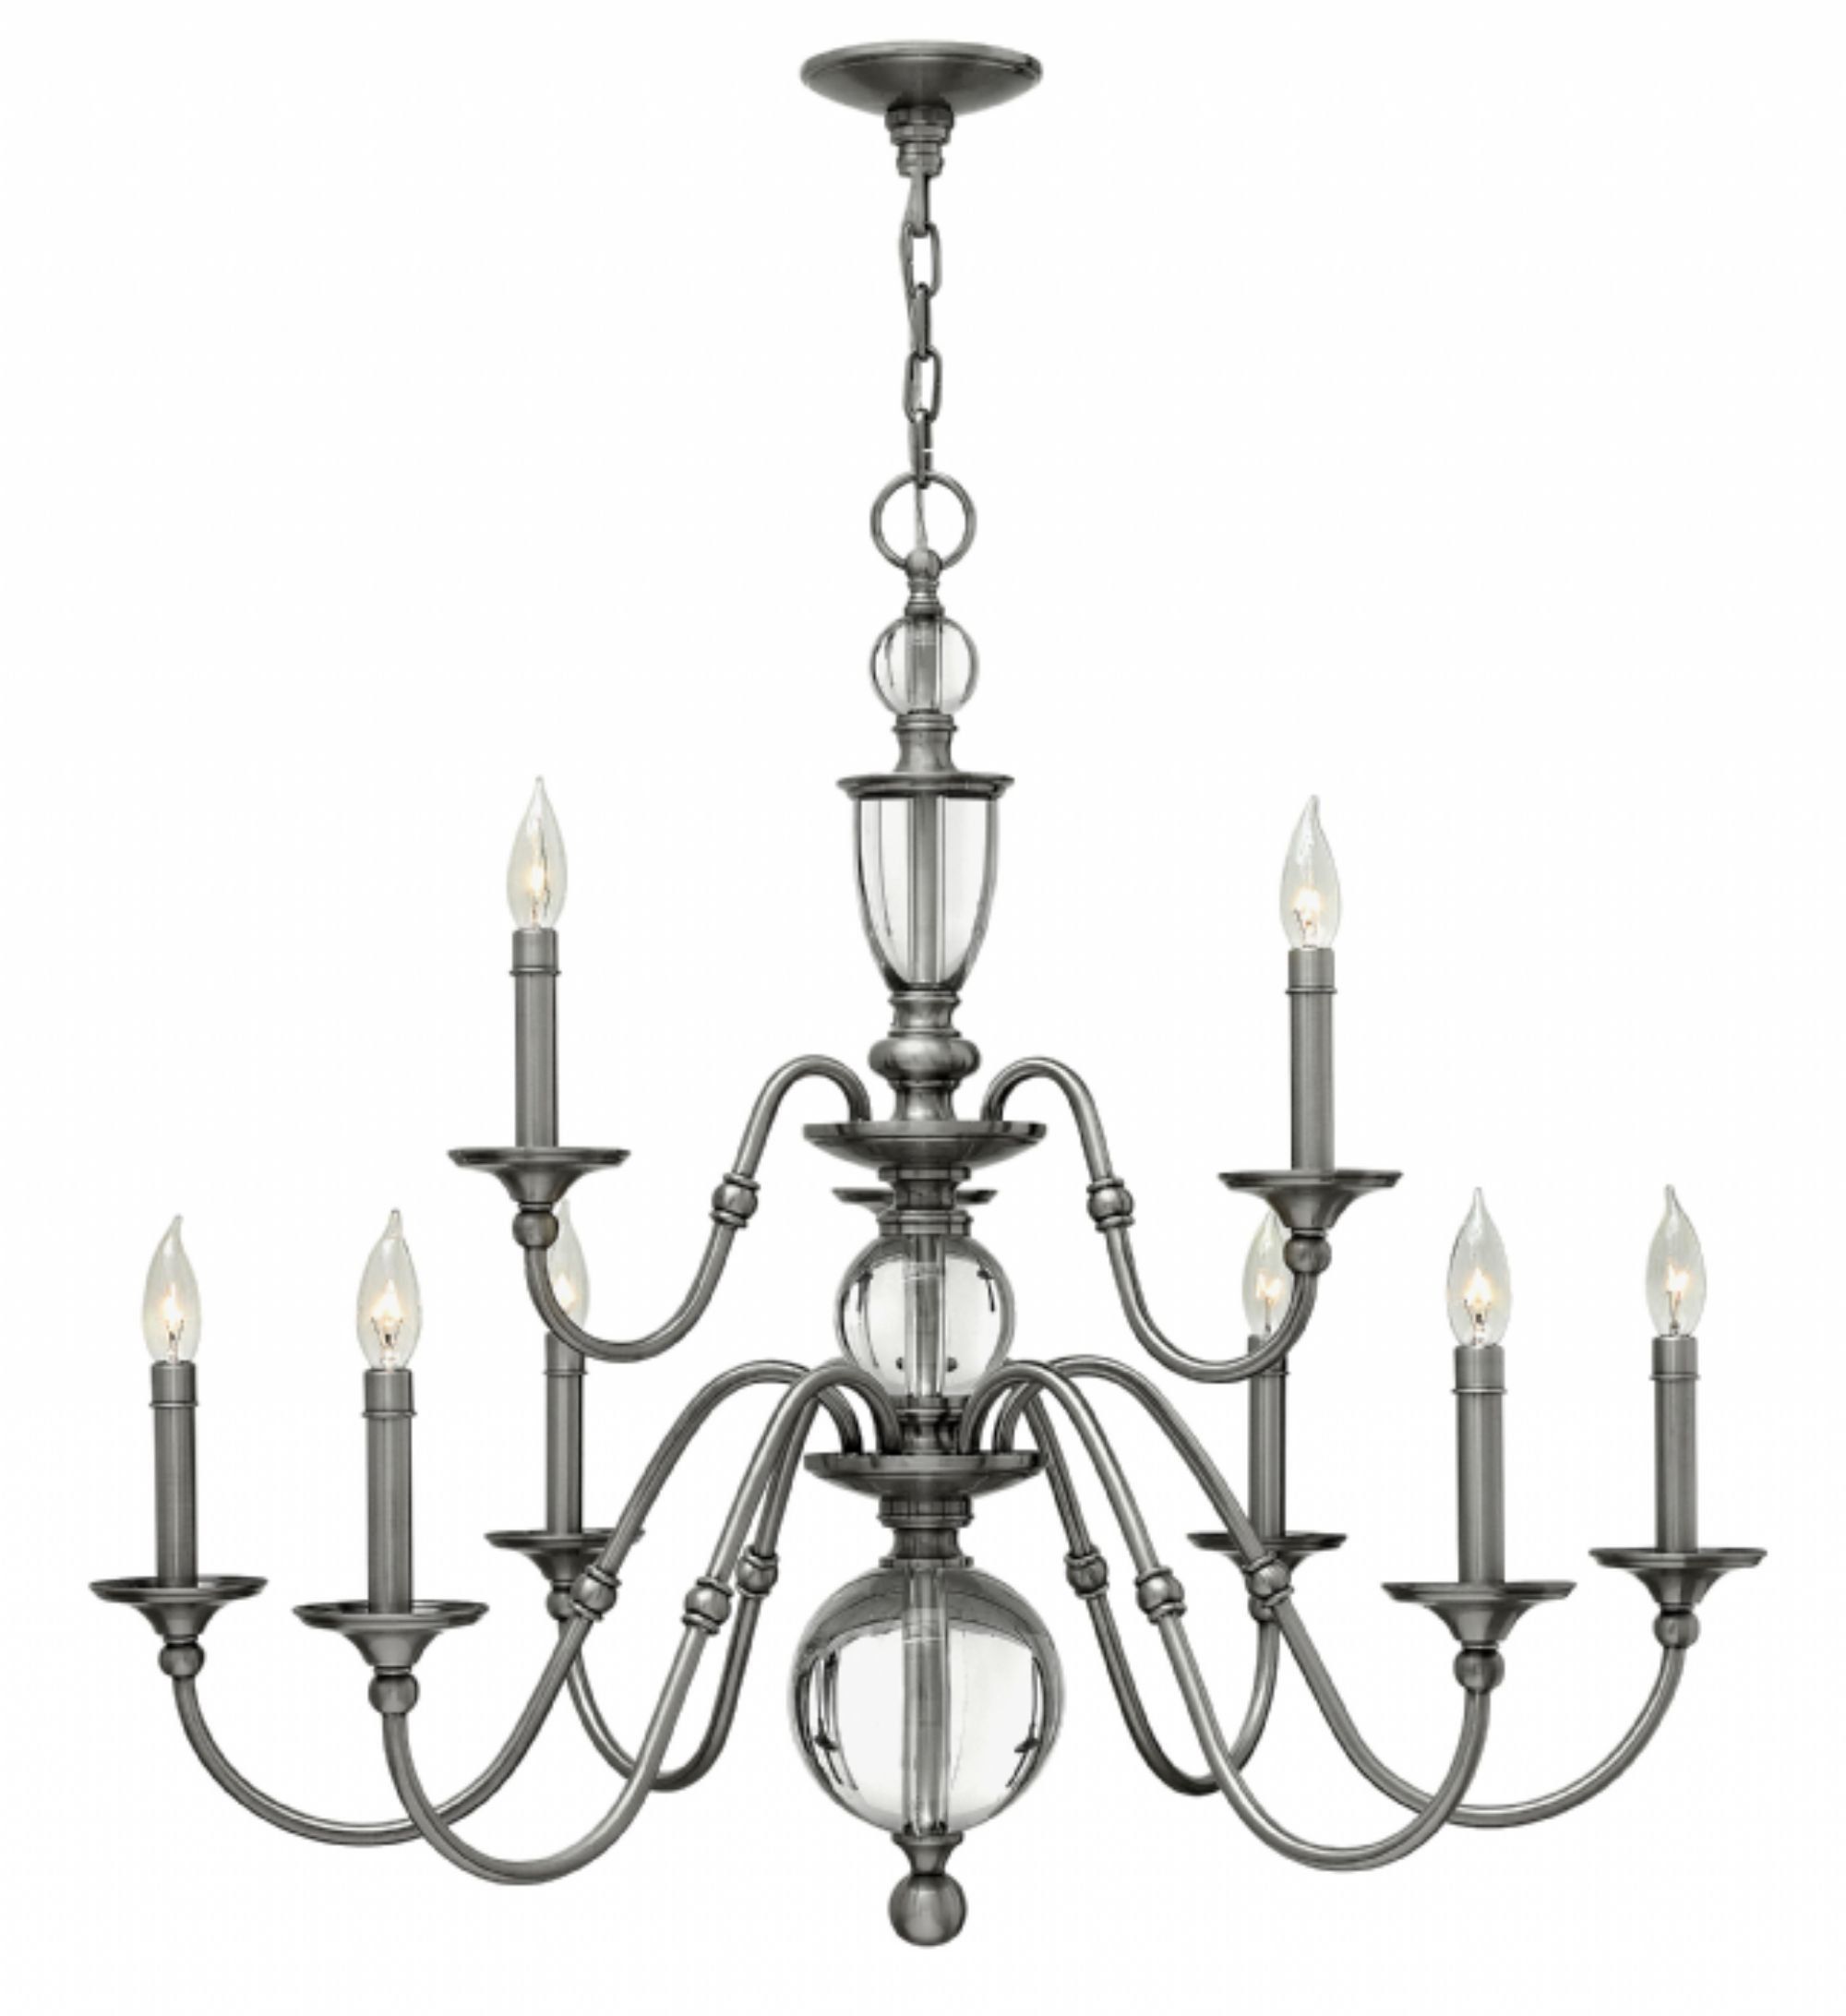 Eleanor 9 Light Chandelier Pertaining To Kenedy 9 Light Candle Style Chandeliers (View 13 of 30)